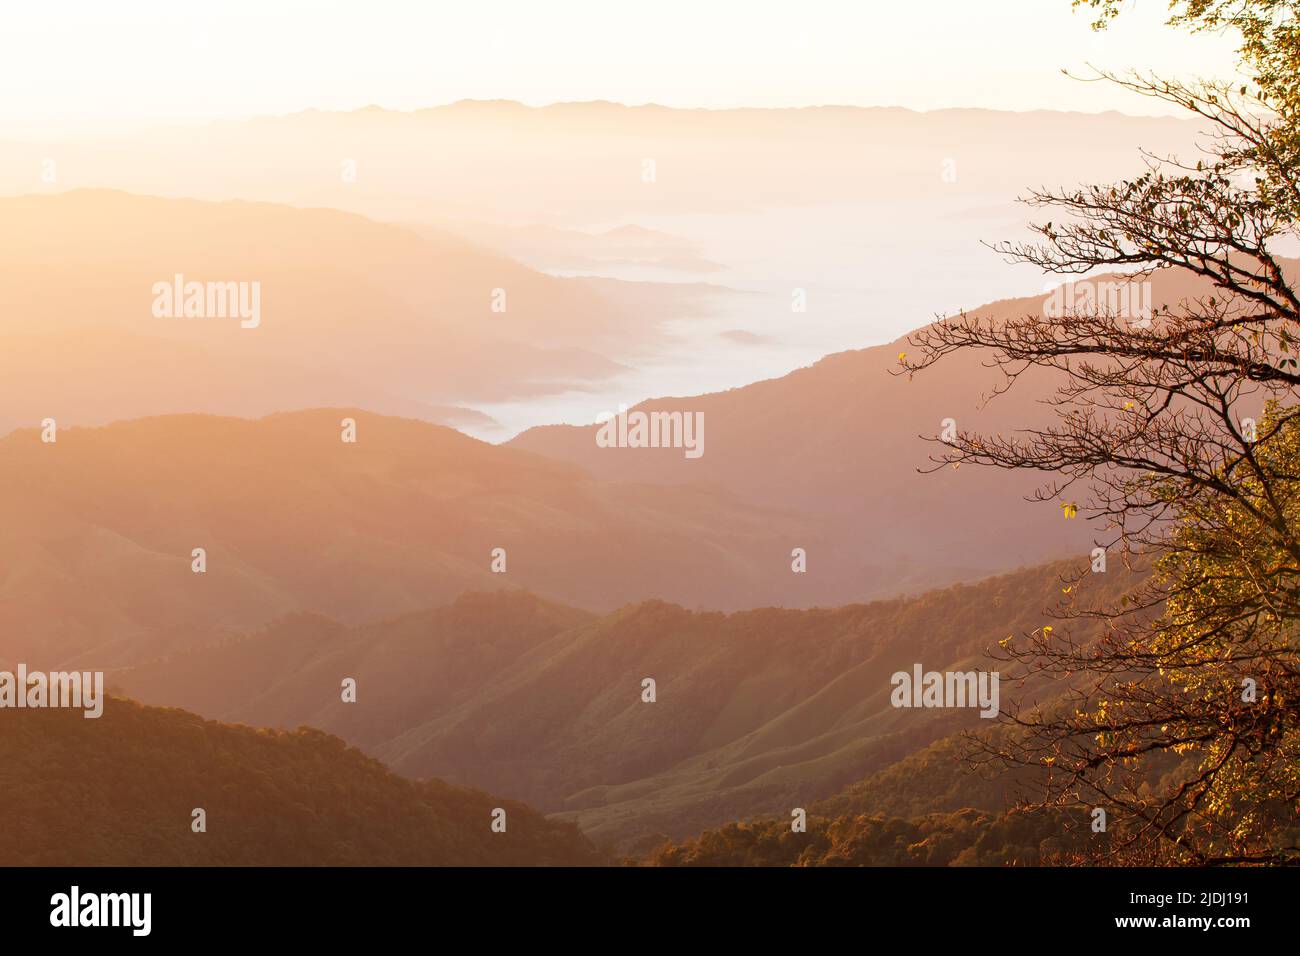 The scenery of mountains on a winter morning, sunrise shines on soft fog in a valley. Nan, Thailand. Focus on the tree in the foreground. Stock Photo